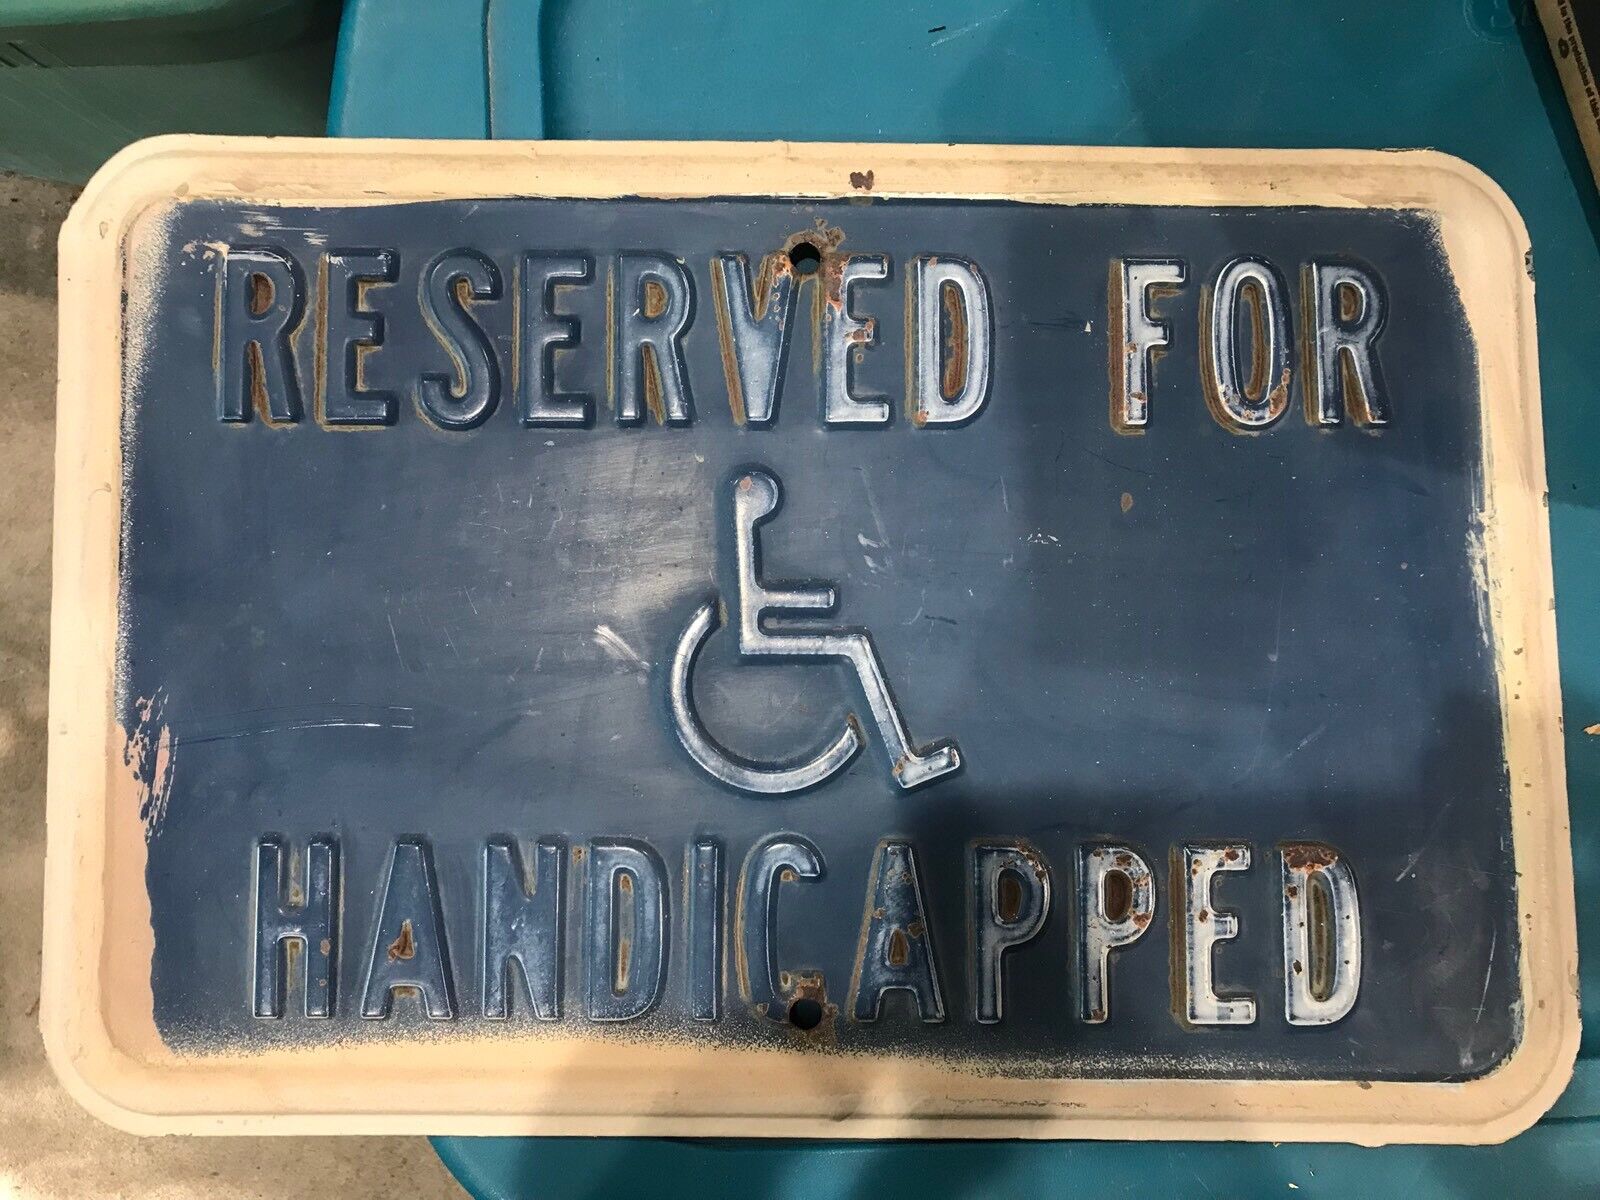 Vintage RESERVED FOR HANDICAPPPED SIGN embossed Heavy Steel. G